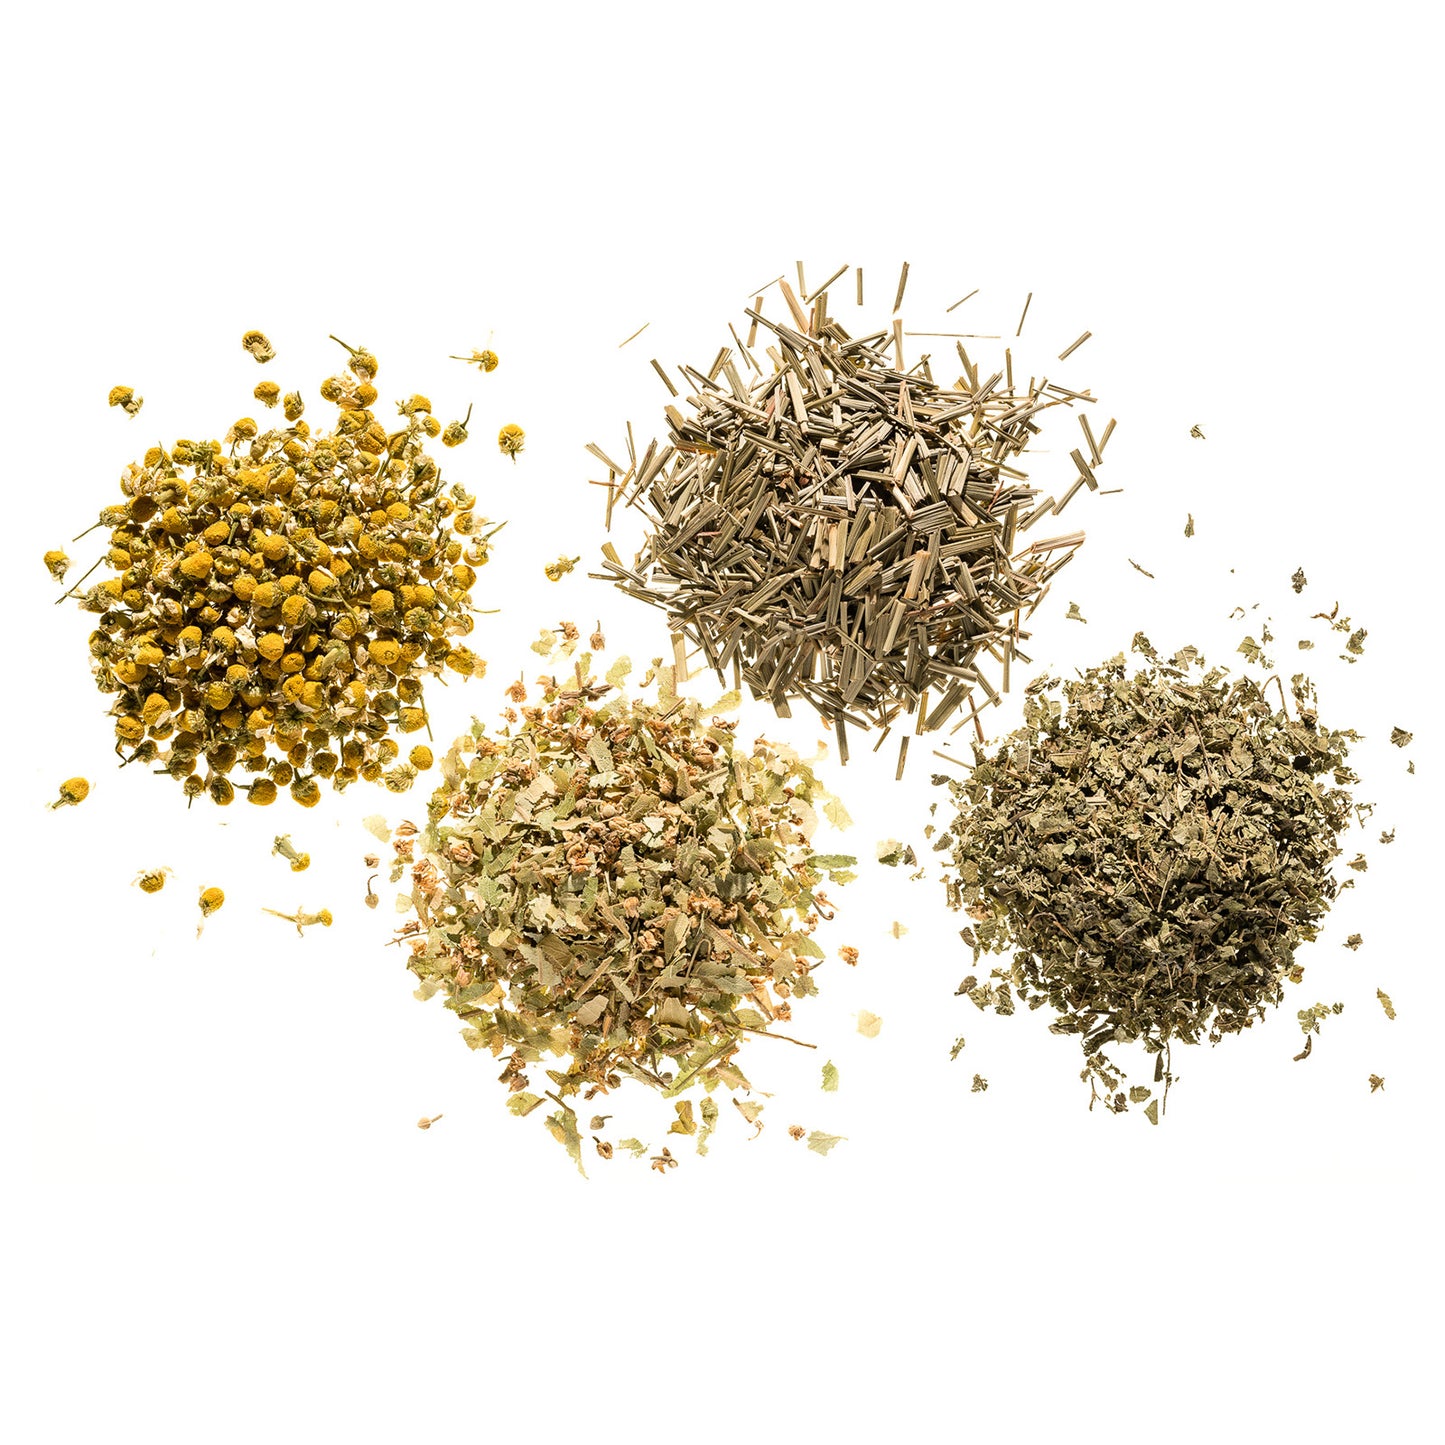 Herbal and Spice Blends